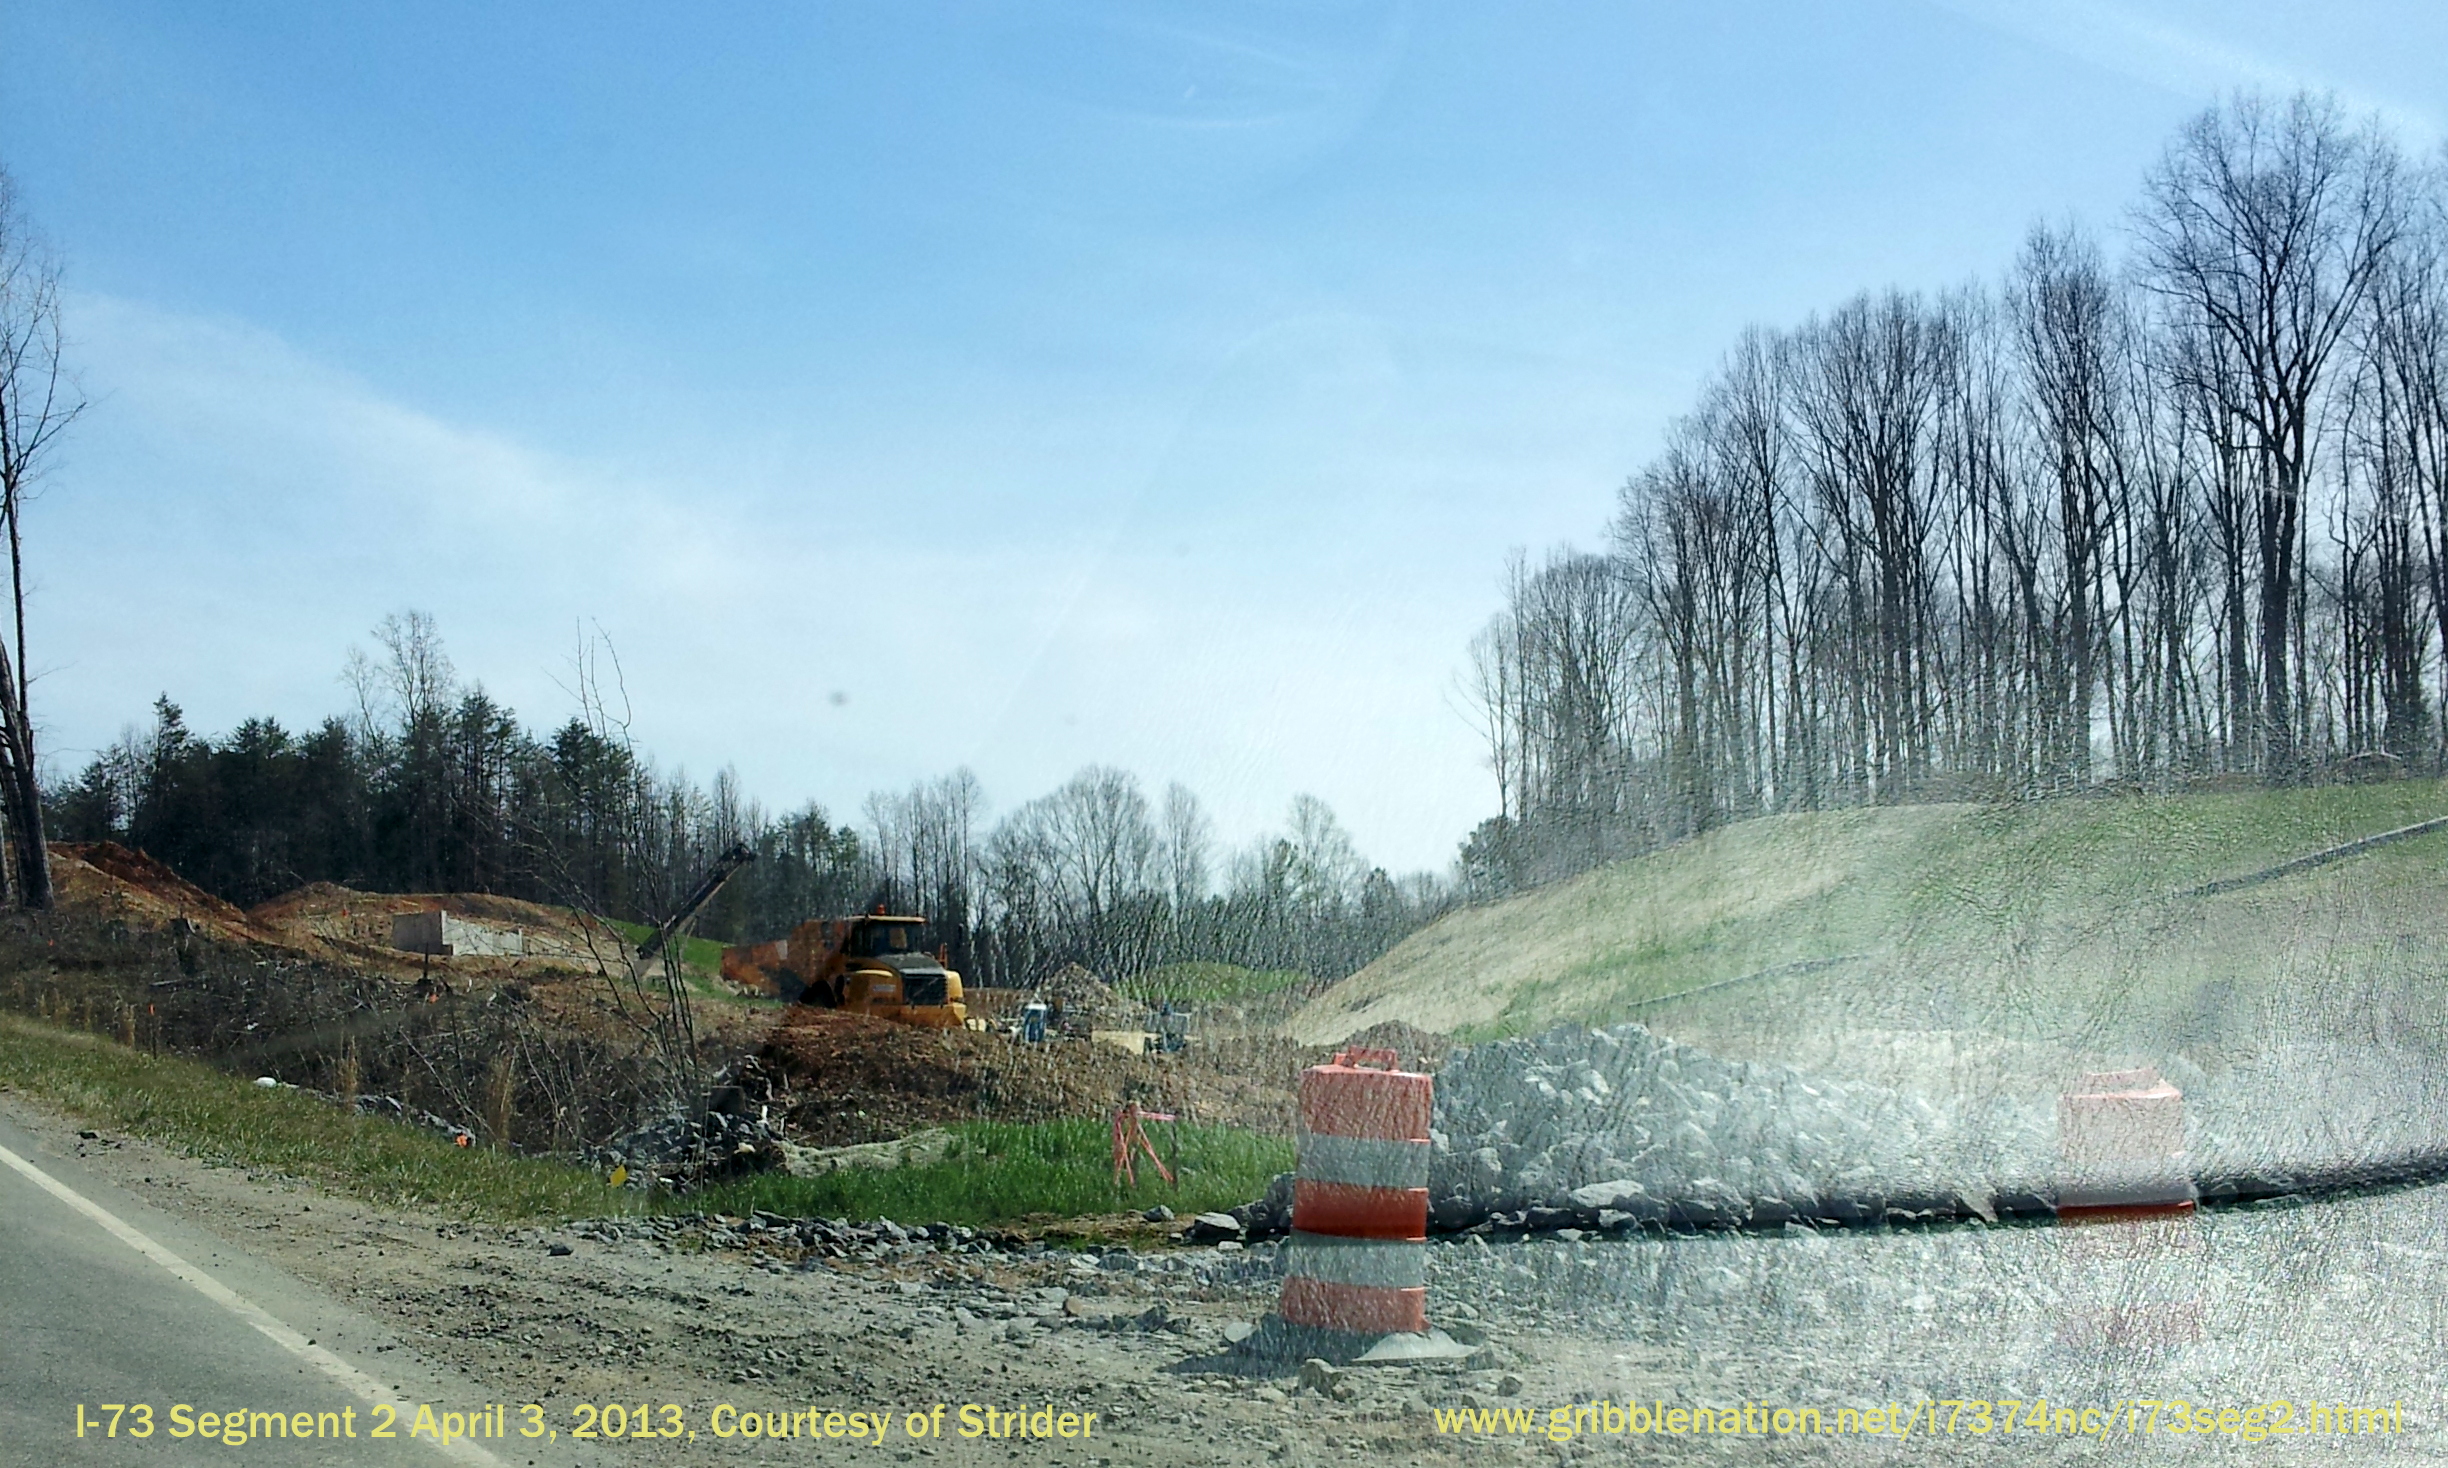 Photo of I-73 Construction showing Future I-73 South Ramp from US 220 South, 
courtesy of Strider